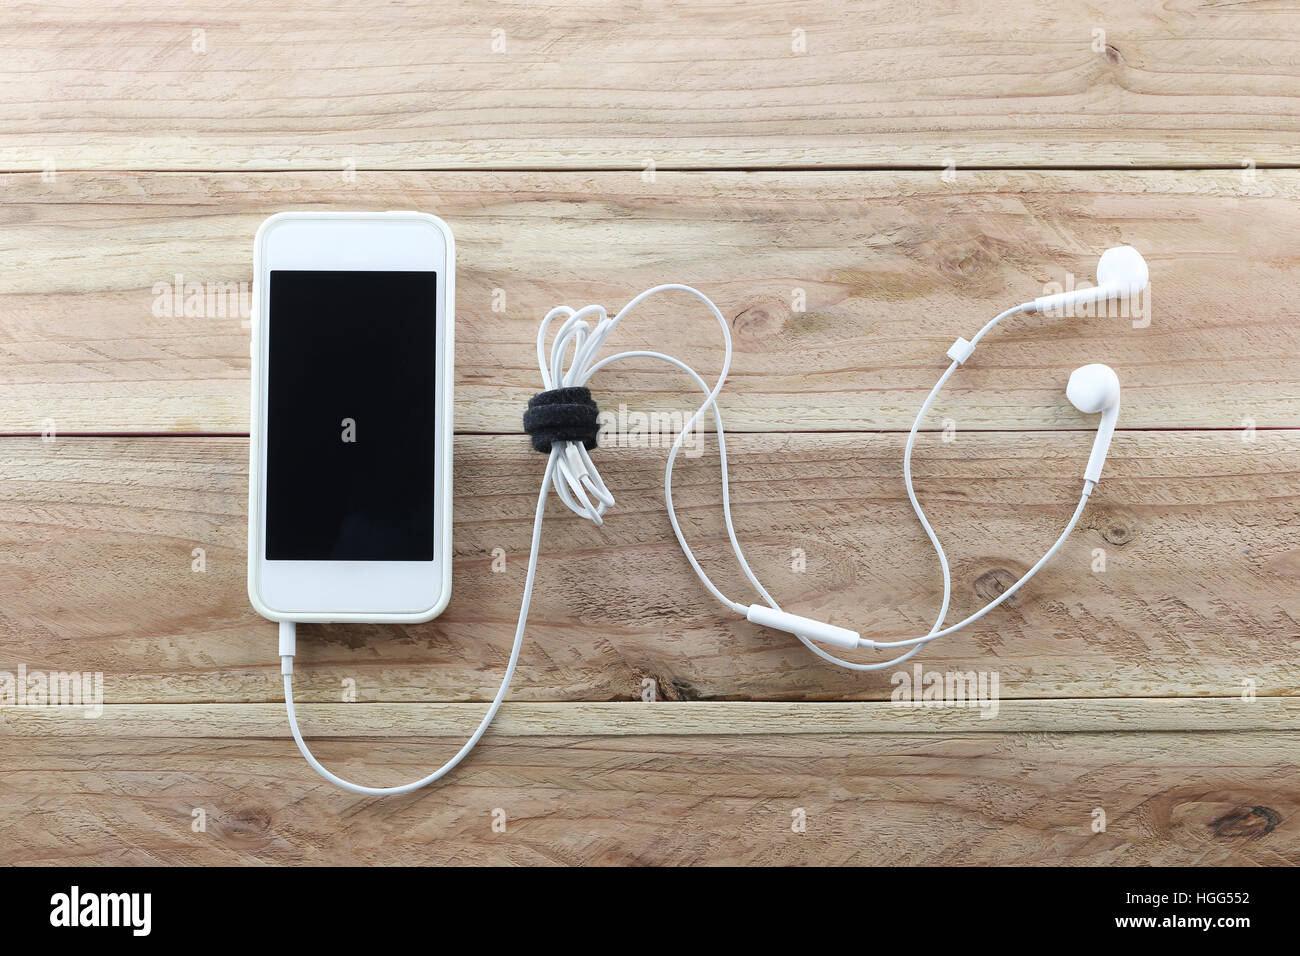 White smartphone on brown wood background and a headset is Device connected,concept of music and technology. Stock Photo